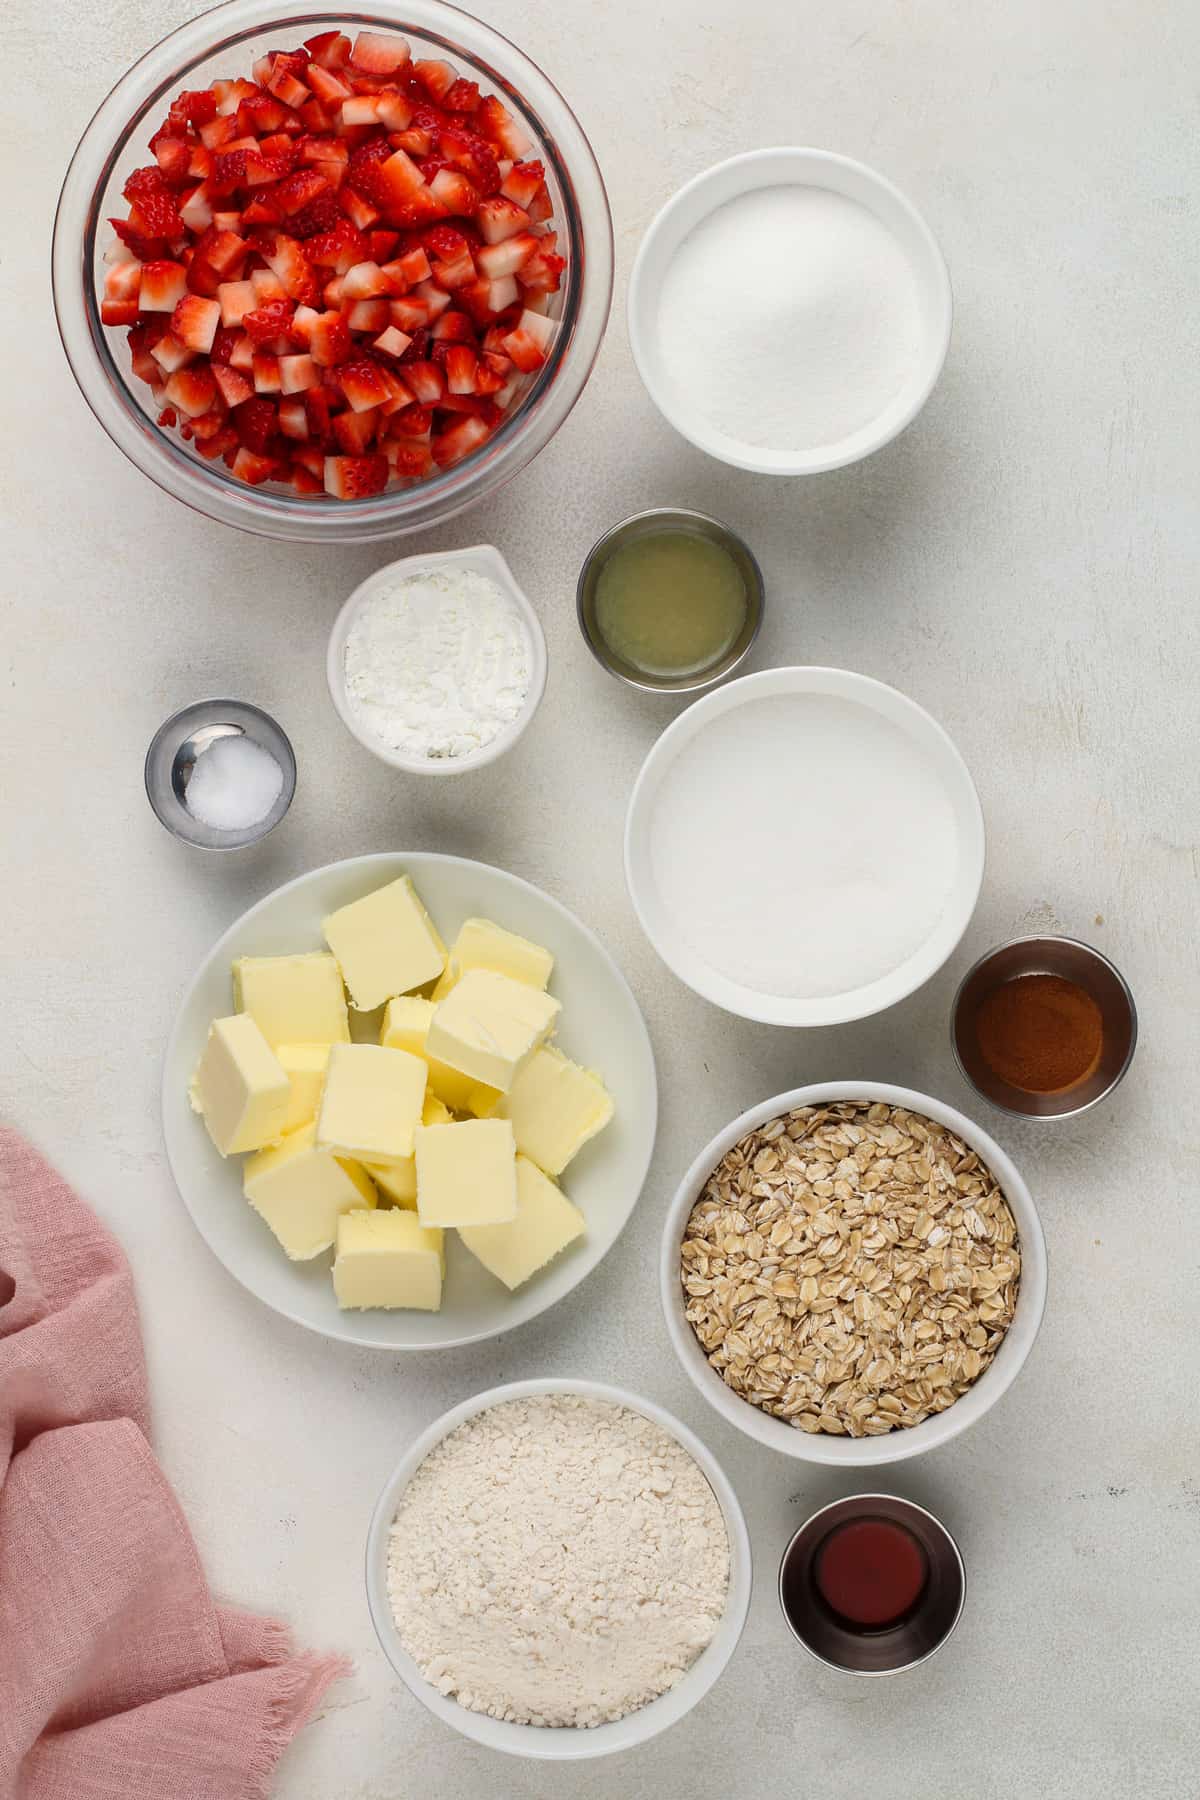 Ingredients for strawberry oatmeal bars arranged on a light-colored countertop.